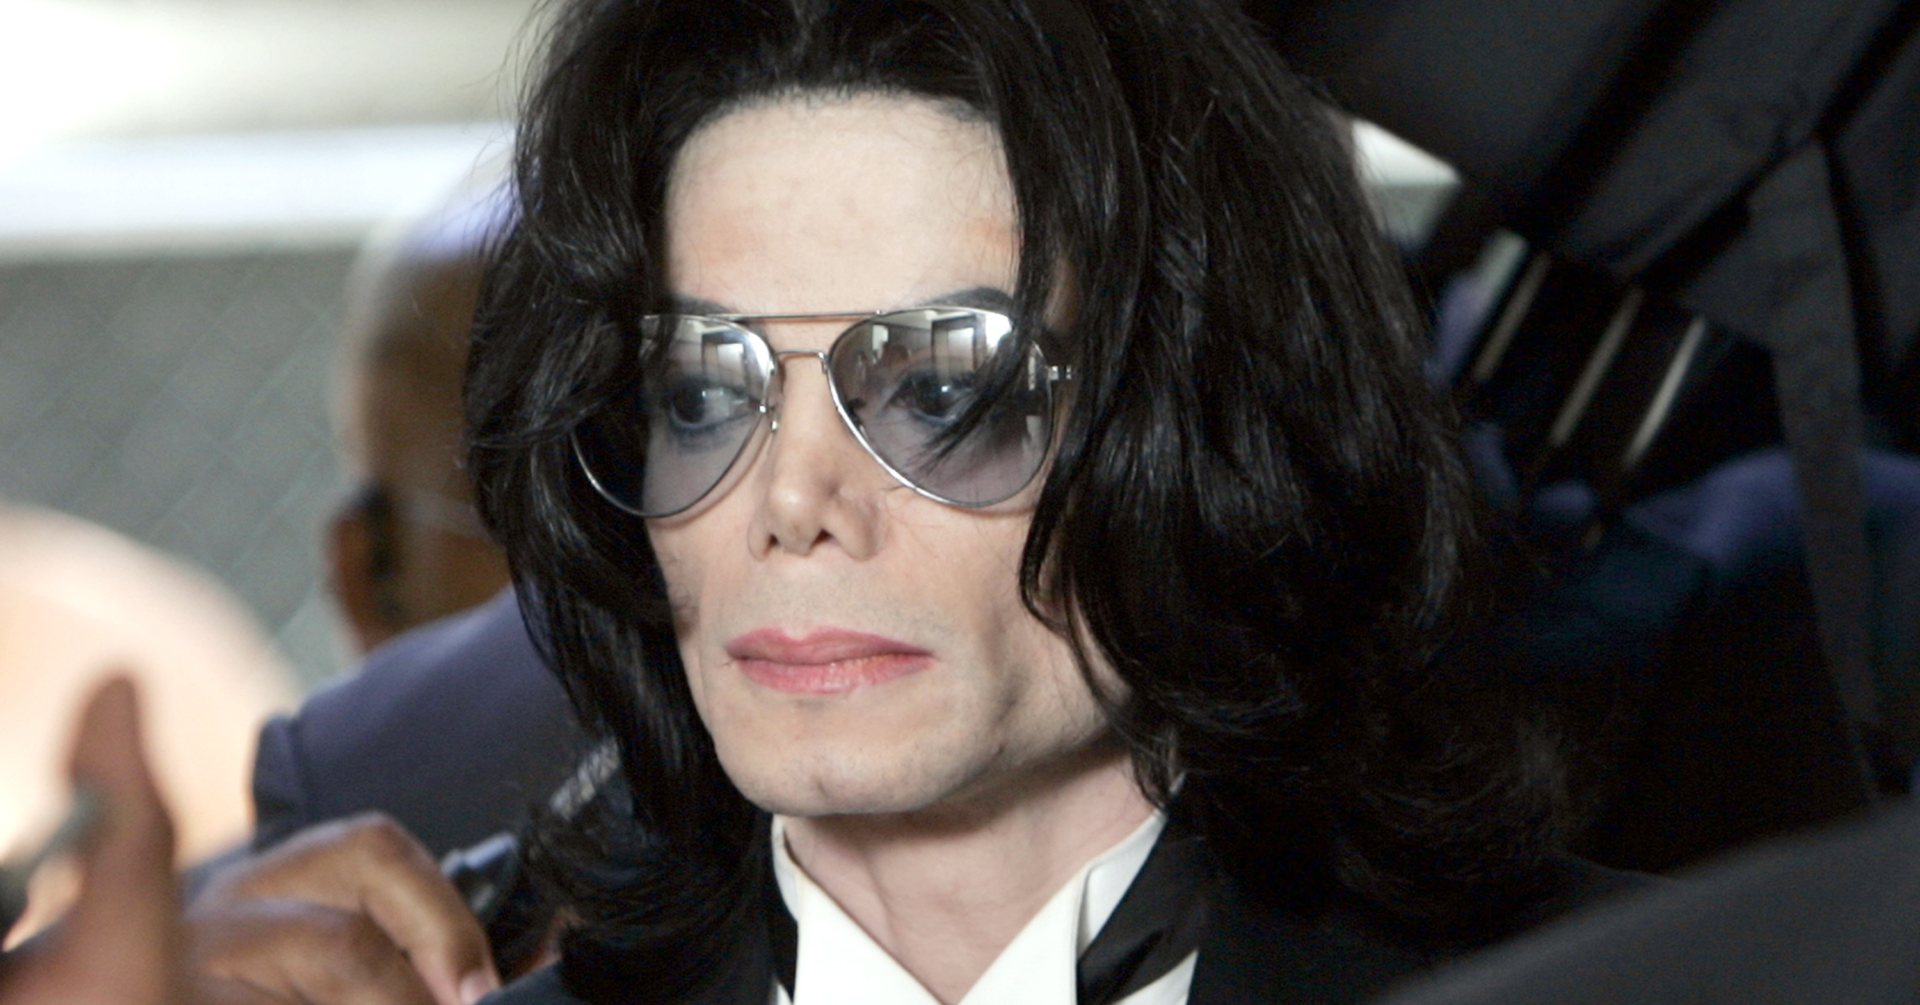 Most People Haven't Stopped Listening to Michael Jackson's Music After Documentary